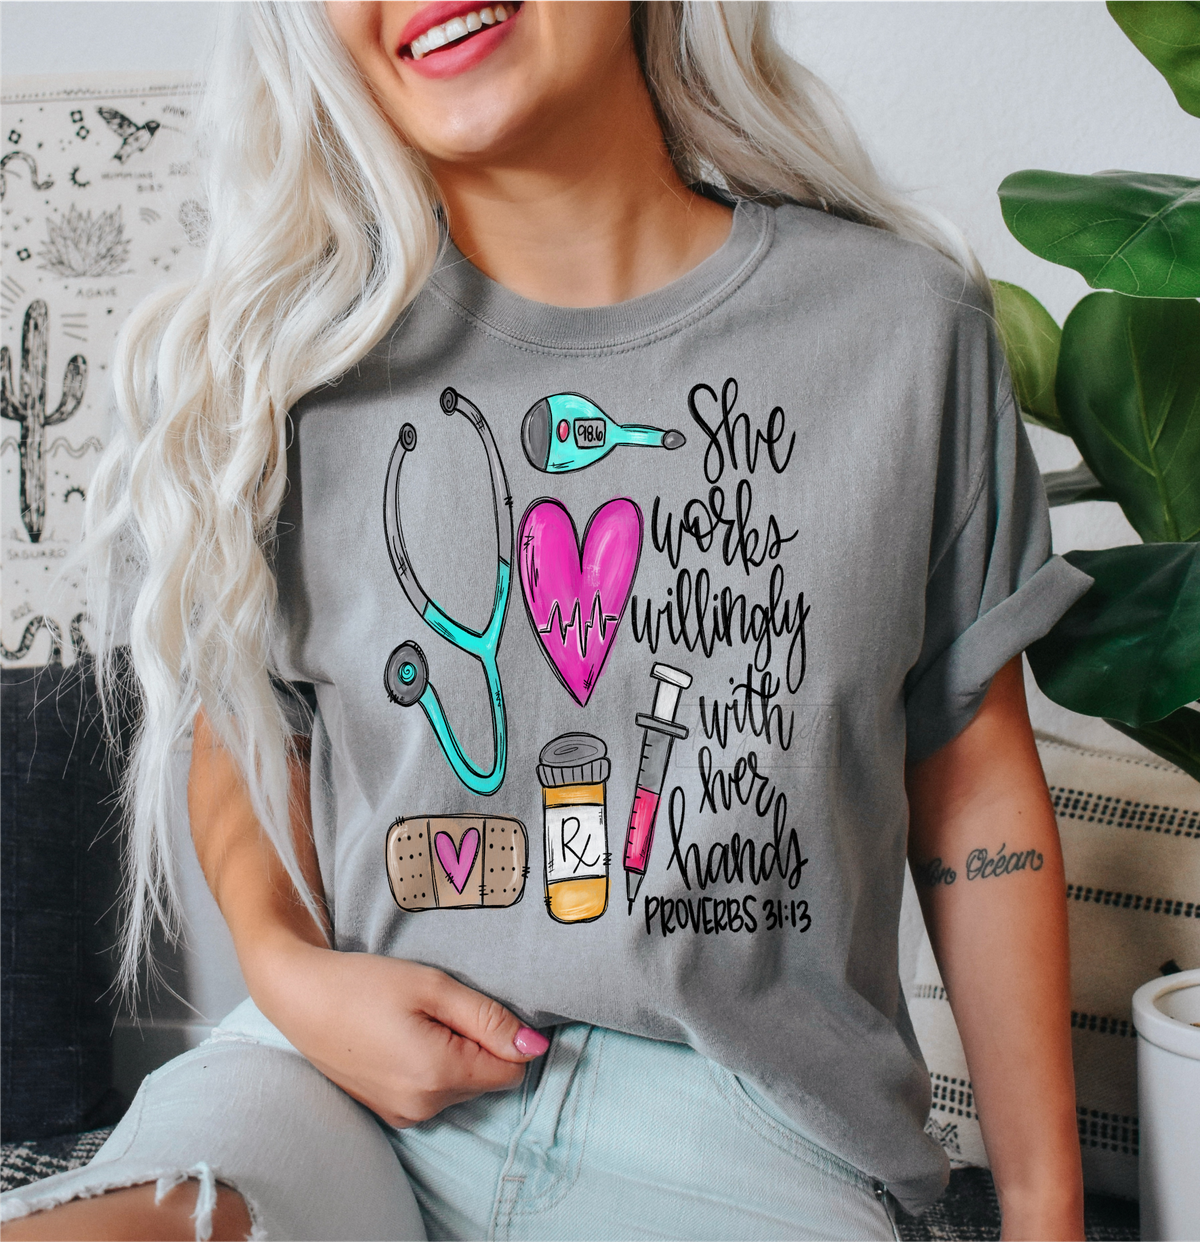 She works willingly with her hands proverbs 31:13 NURSE Doctor Healthcare  size ADULT  DTF TRANSFERPRINT TO ORDER